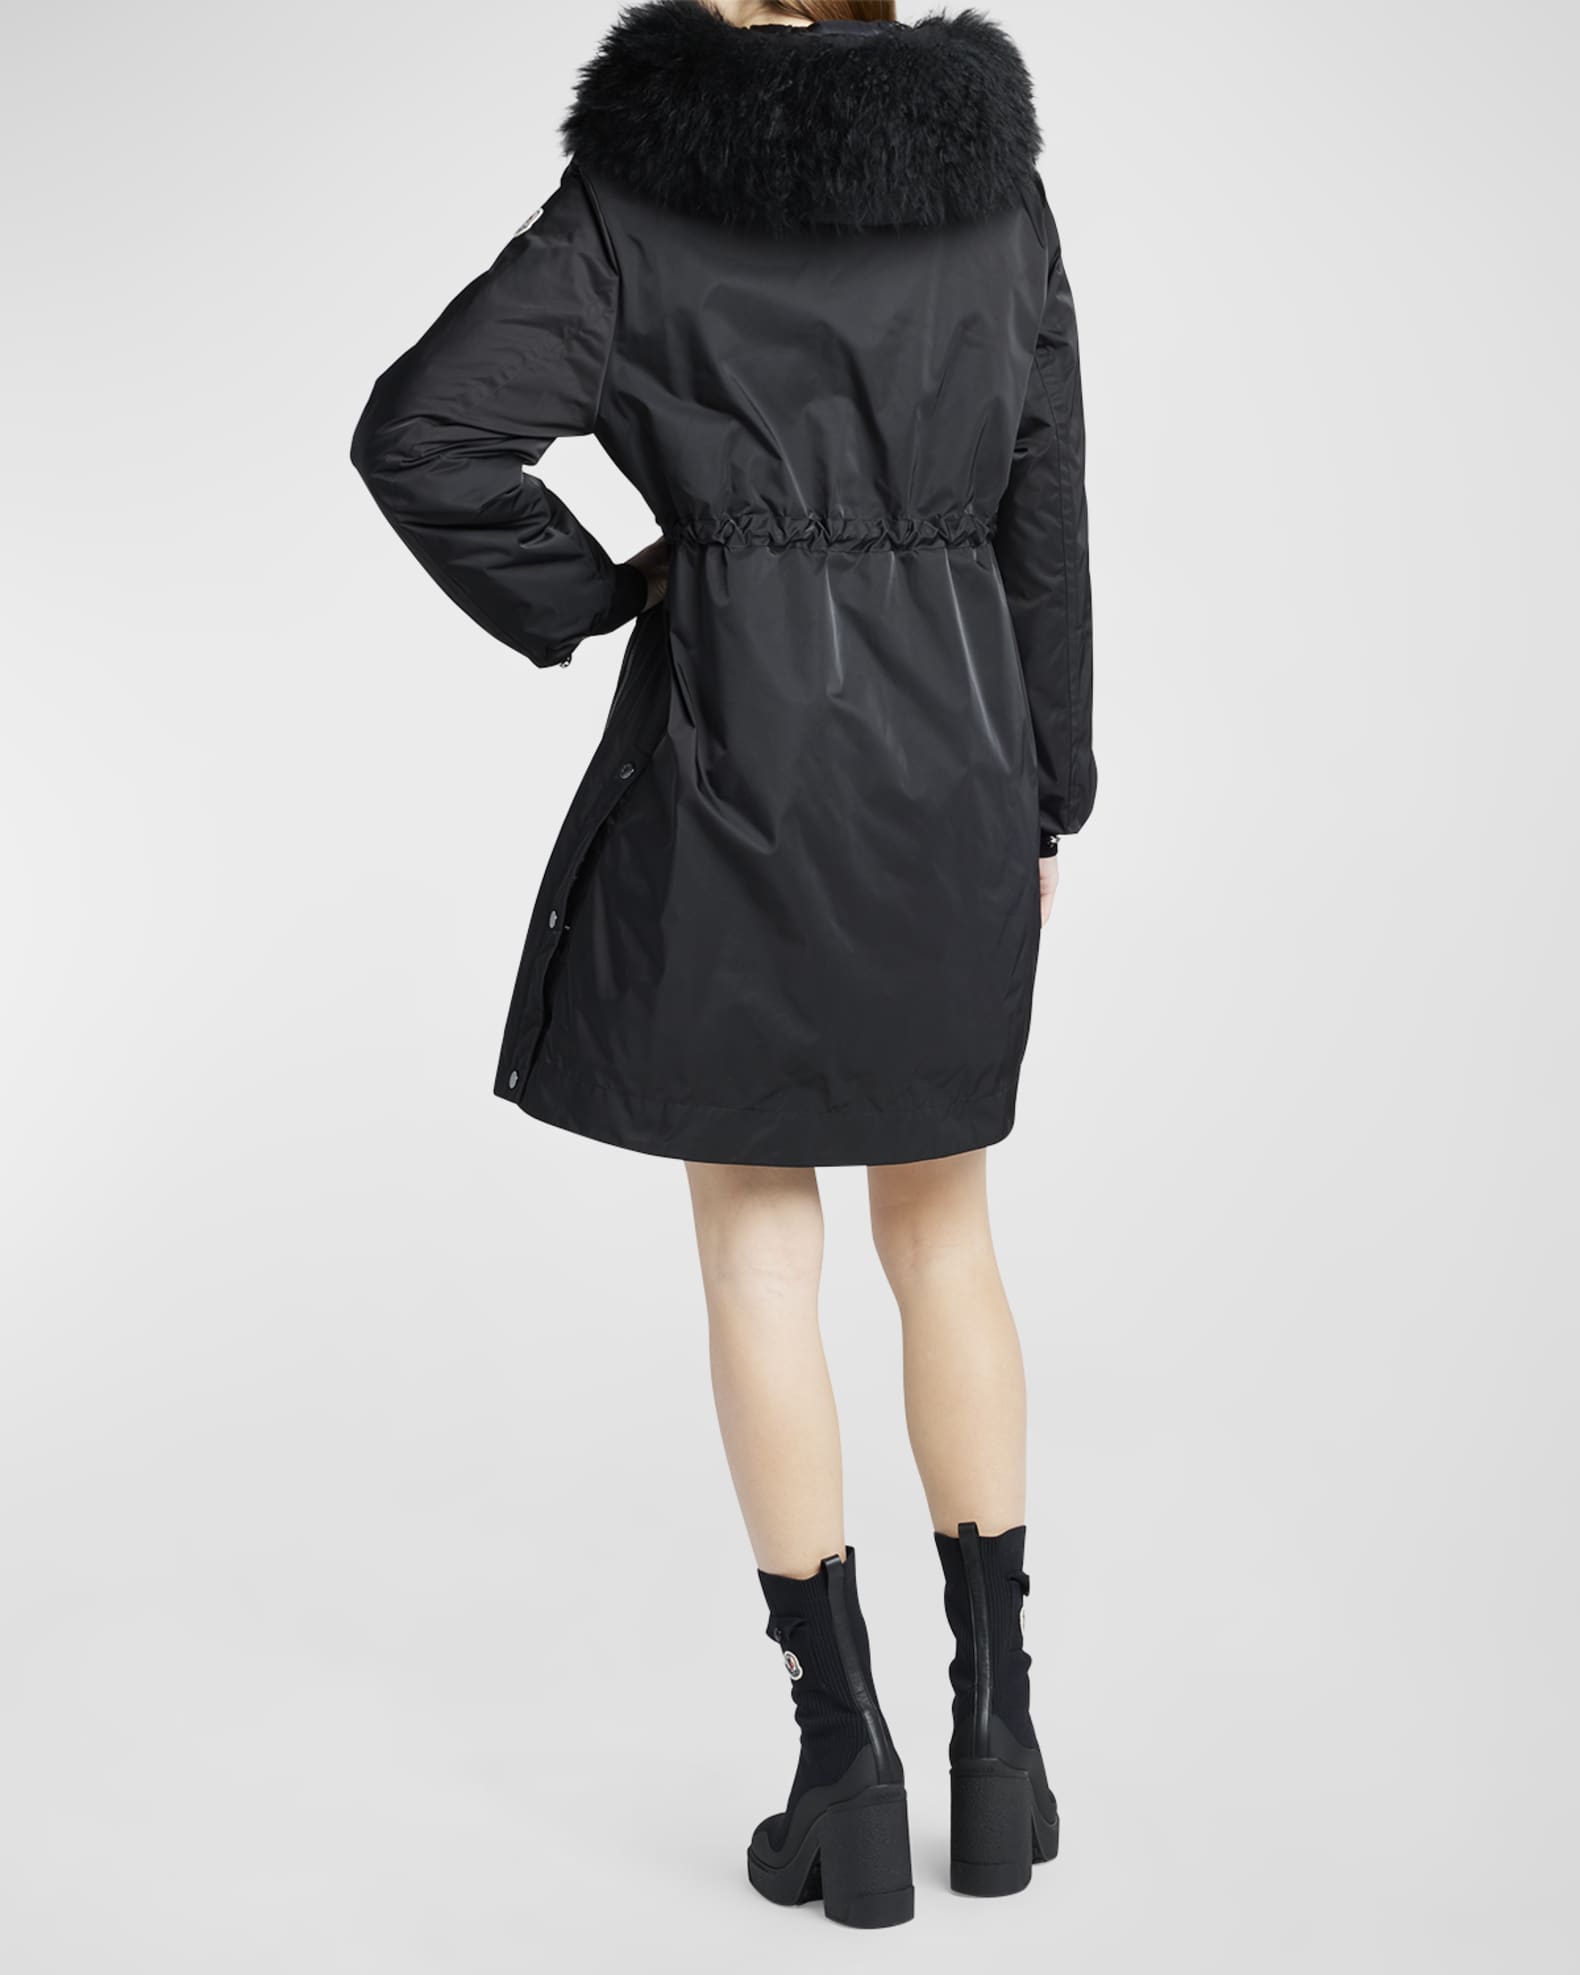 Durbec Long Parka Jacket with Shearling Collar